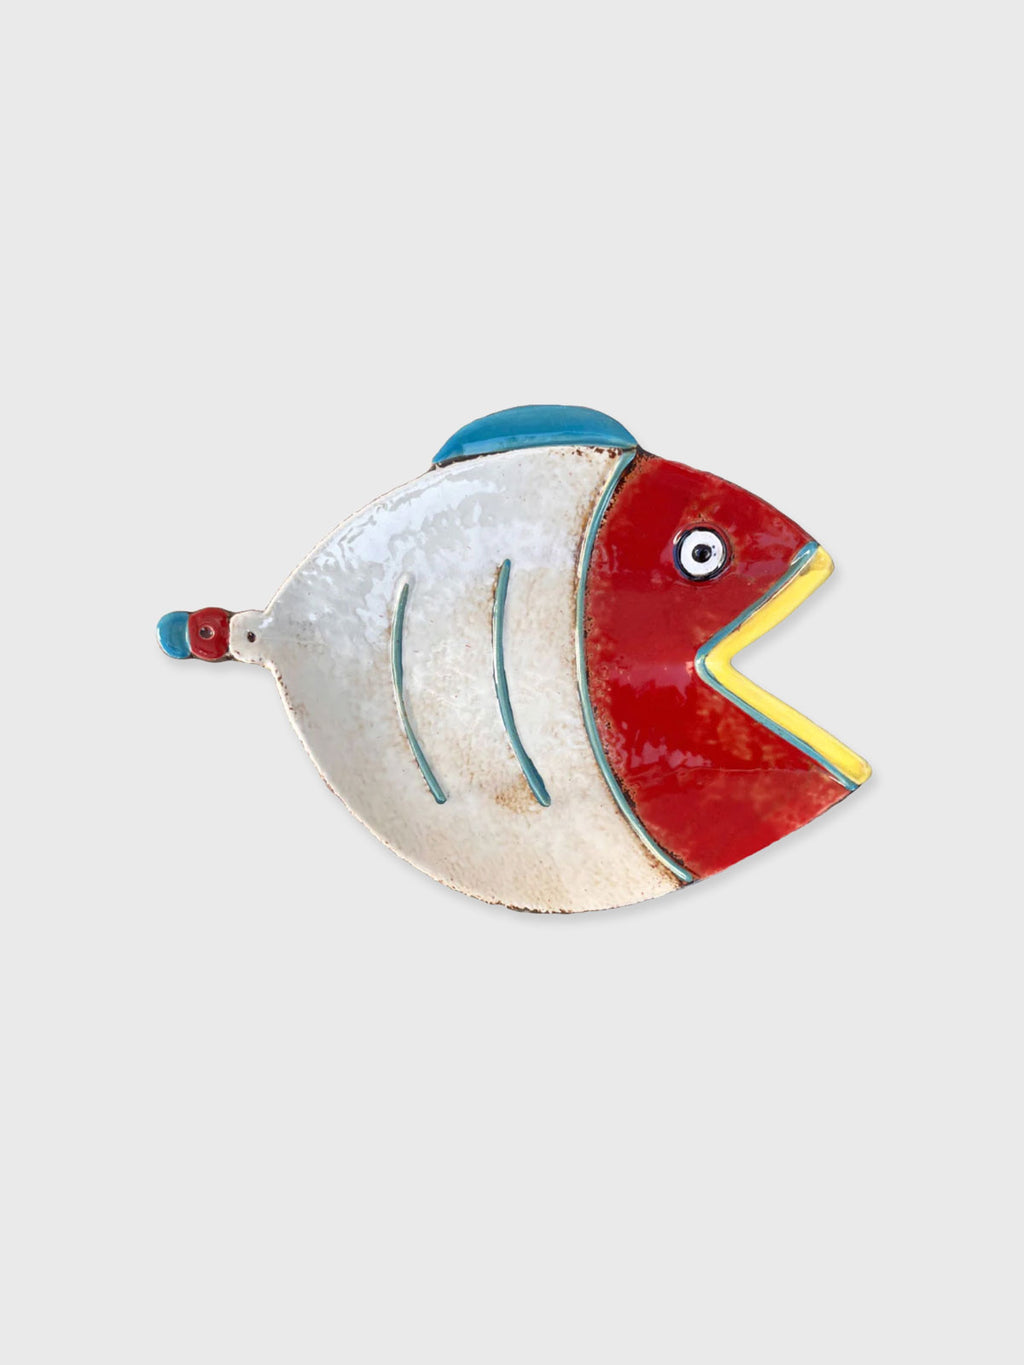 Ceramic Red Coloured Fish Shaped Plate "Comic" - 26cm